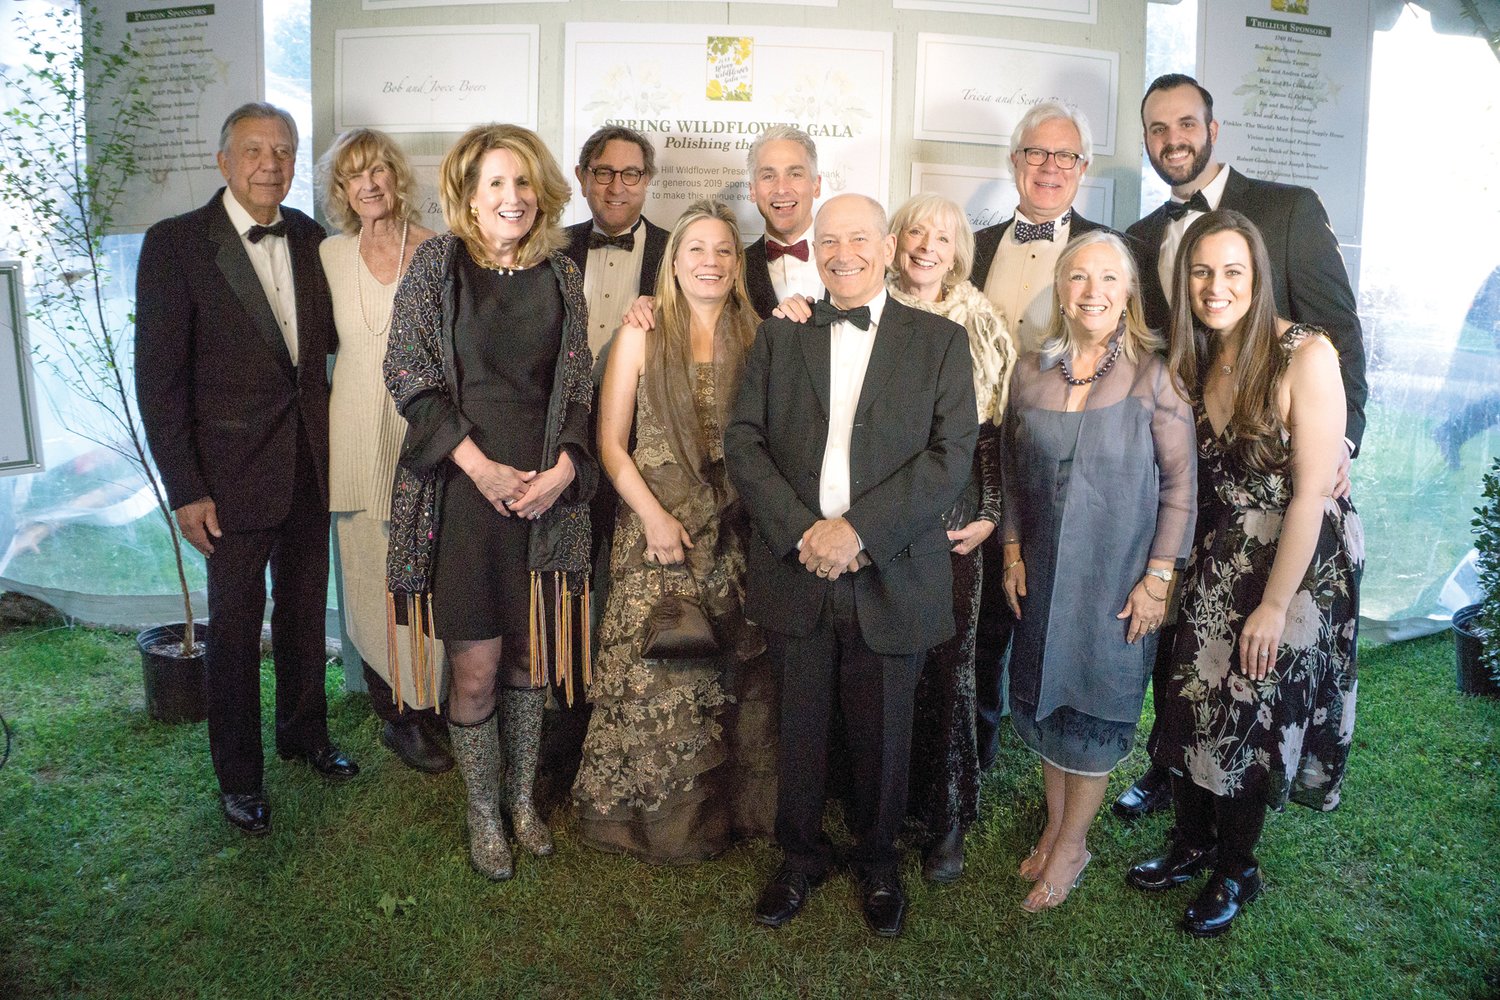 Members of Addison Wolfe Real Estate, which was a sponsor of the Spring Wildflower Gala. Photograph by Carol Ross.